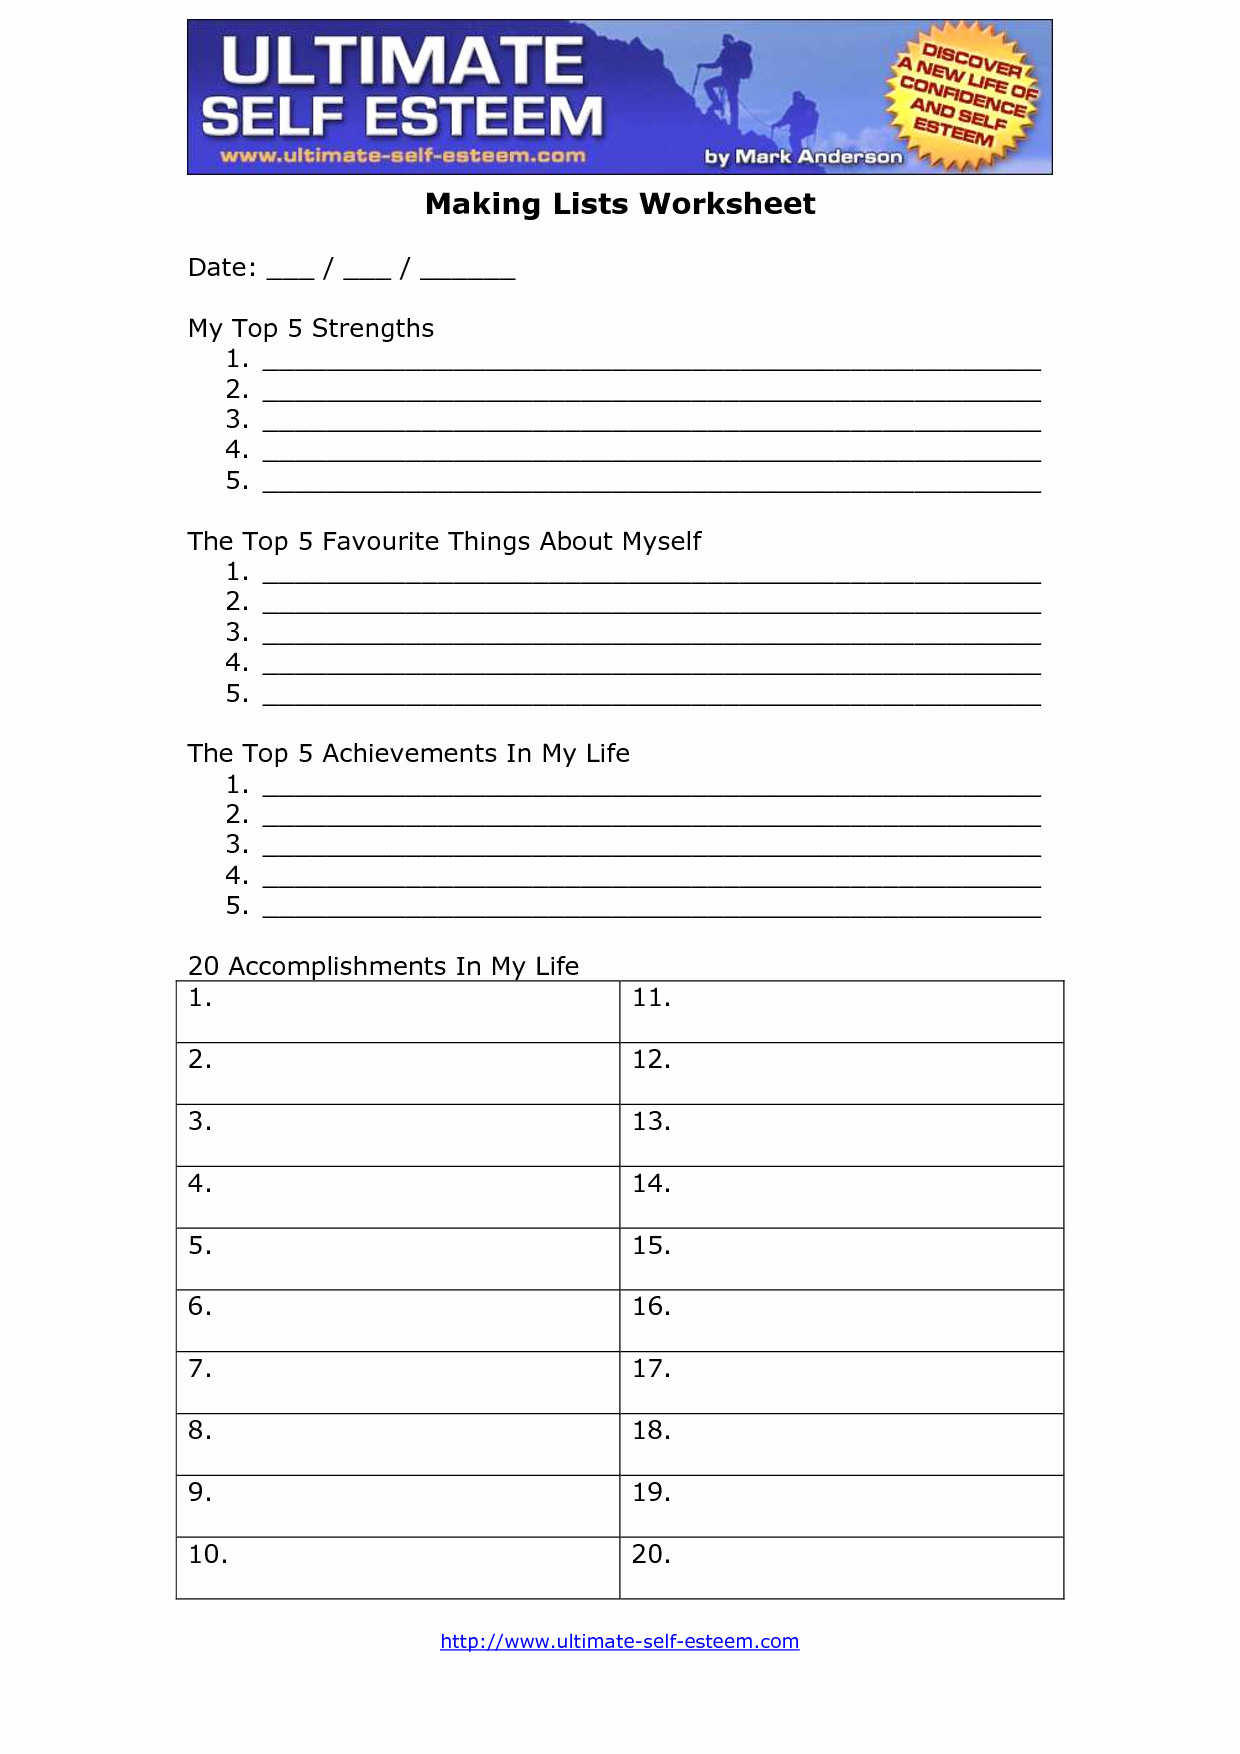 Self Esteem Worksheet for Adults Awesome Worksheets Self Esteem Worksheets for Kids Cheatslist